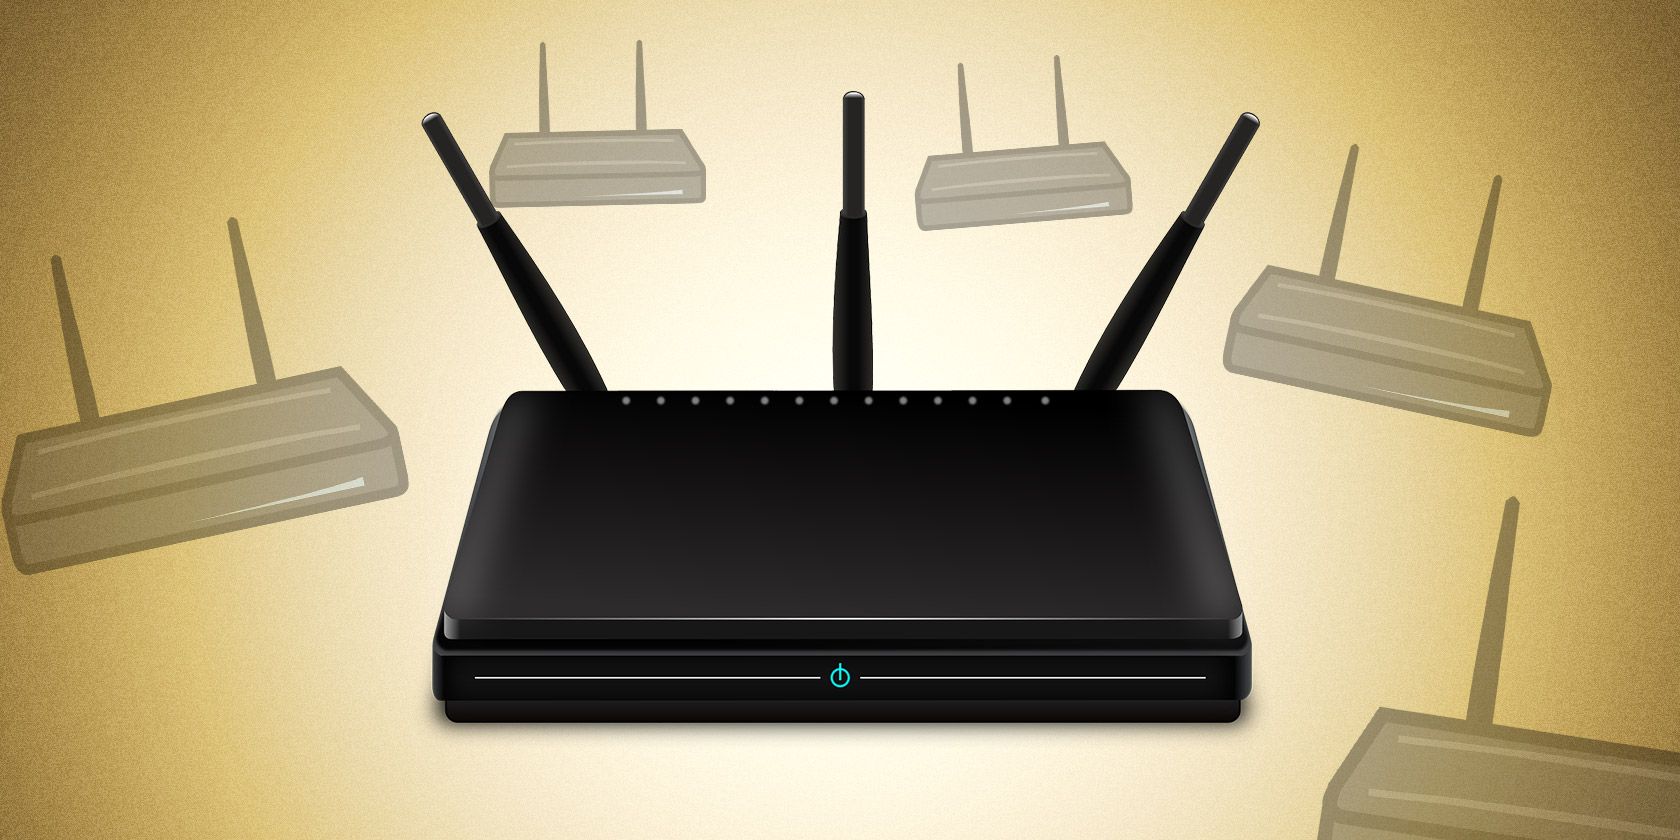 can ostoto wifi hotspot be used with wifi repeater